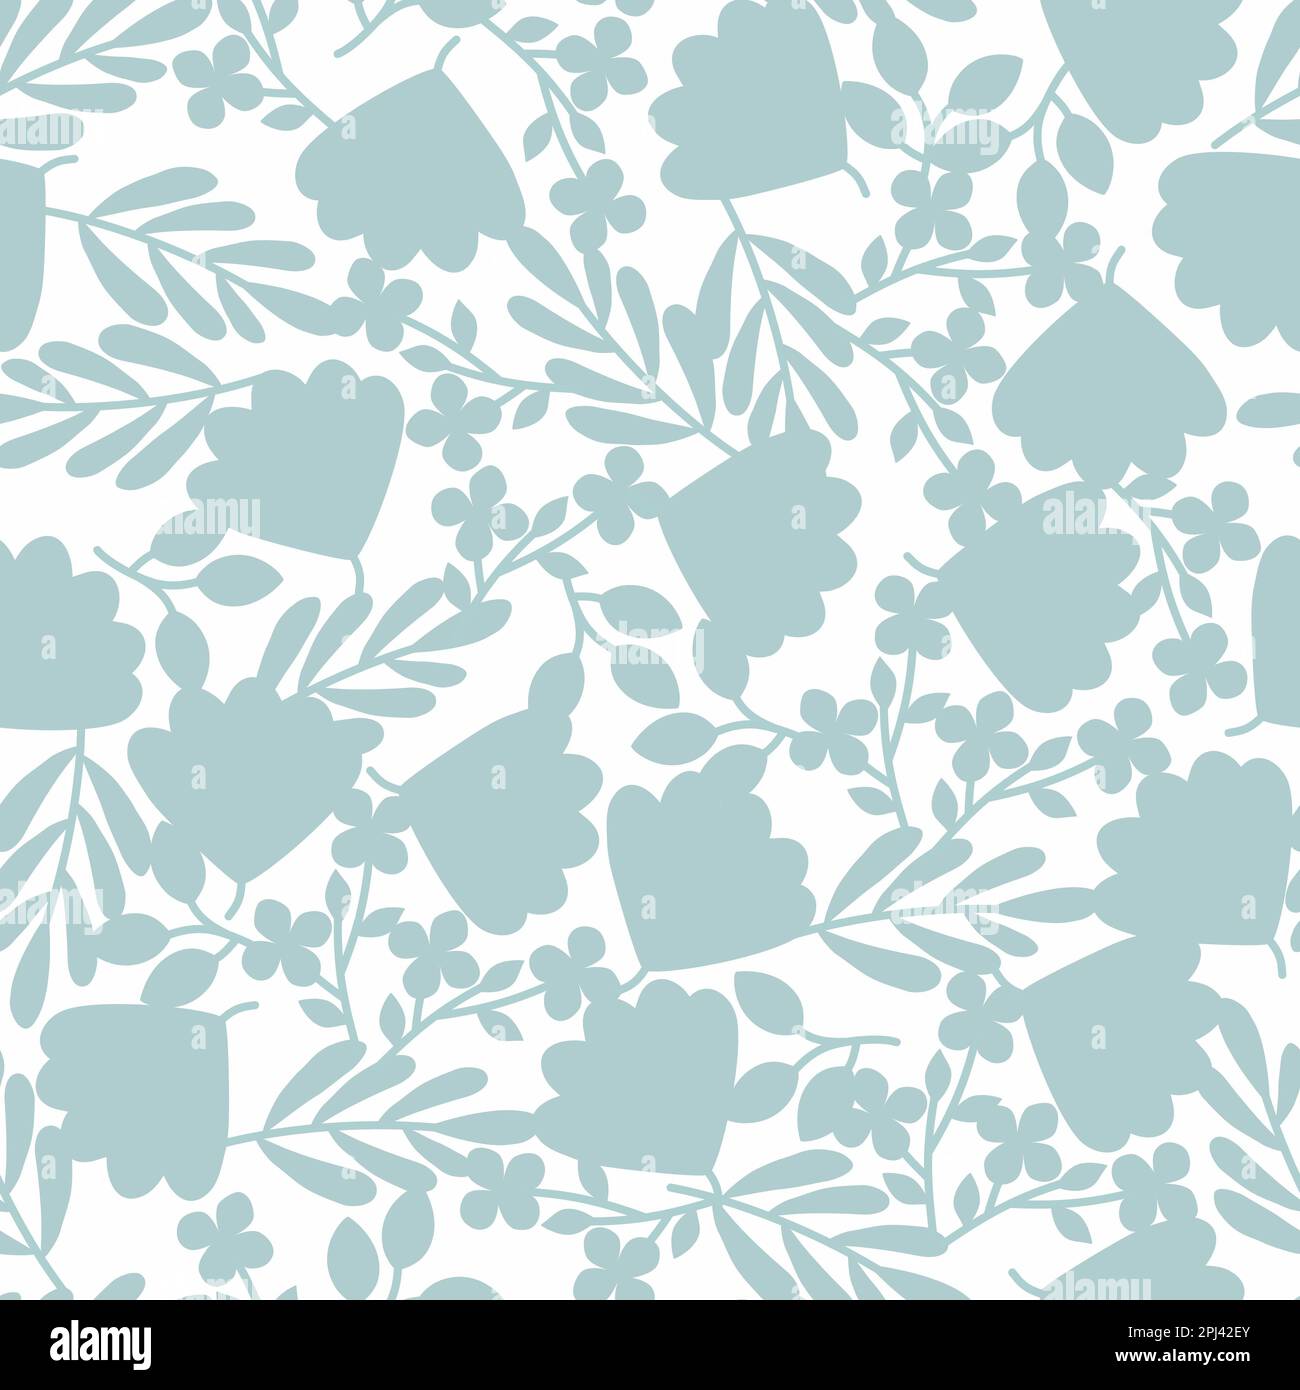 Blue flowers silhouettes seamless pattern. Floral overlapping background. Flower heads, brunches and leaves monochrome allover print Stock Photo